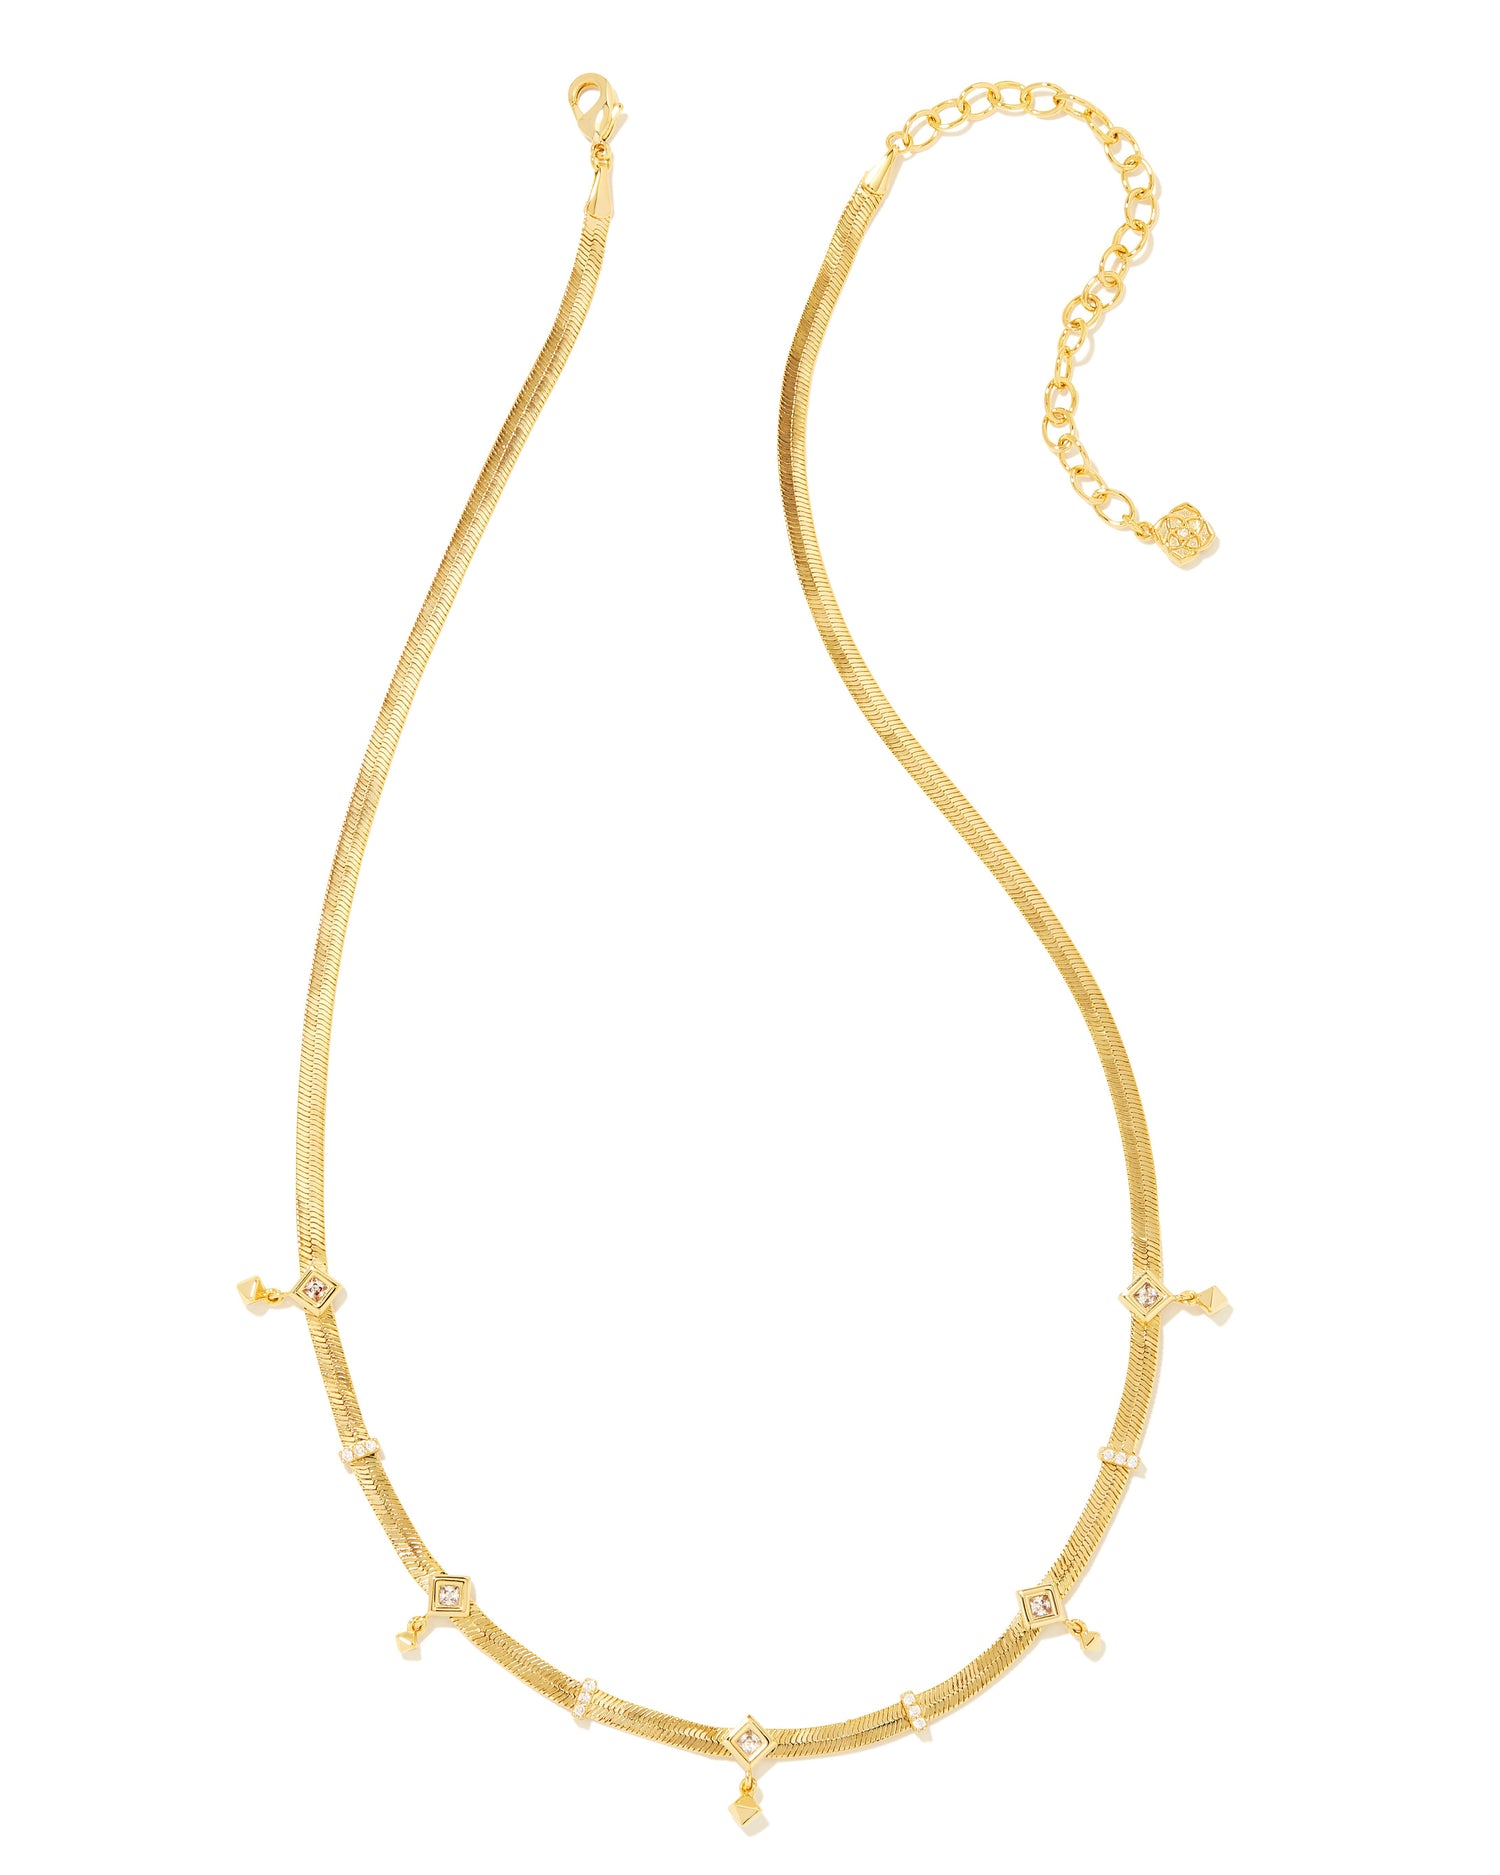 Kendra Scott Chain Necklace Layering Set of 3 in Gold-Plated | REEDS  Jewelers